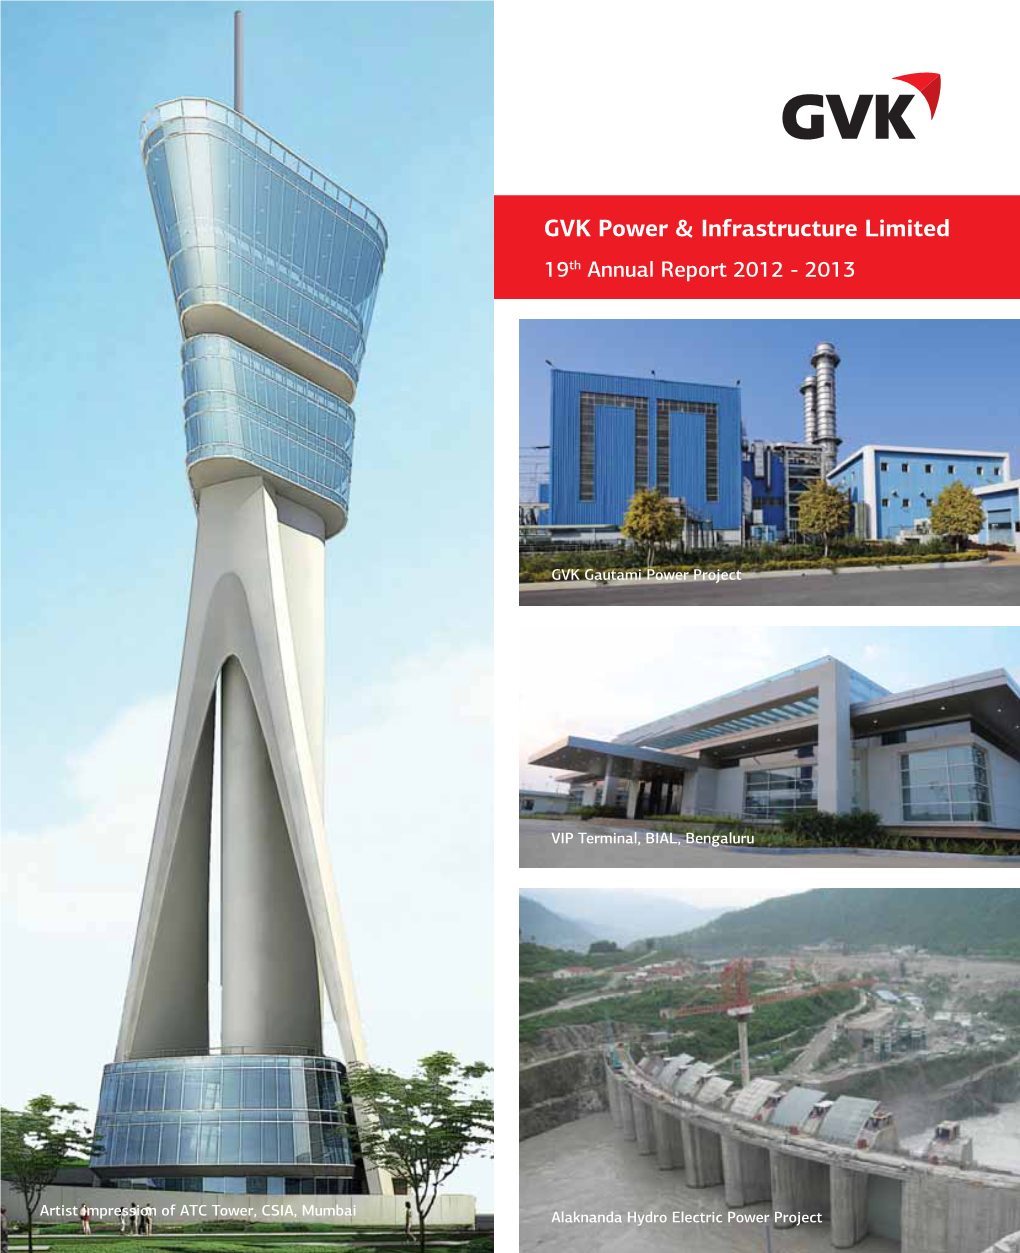 GVK Power & Infrastructure Limited